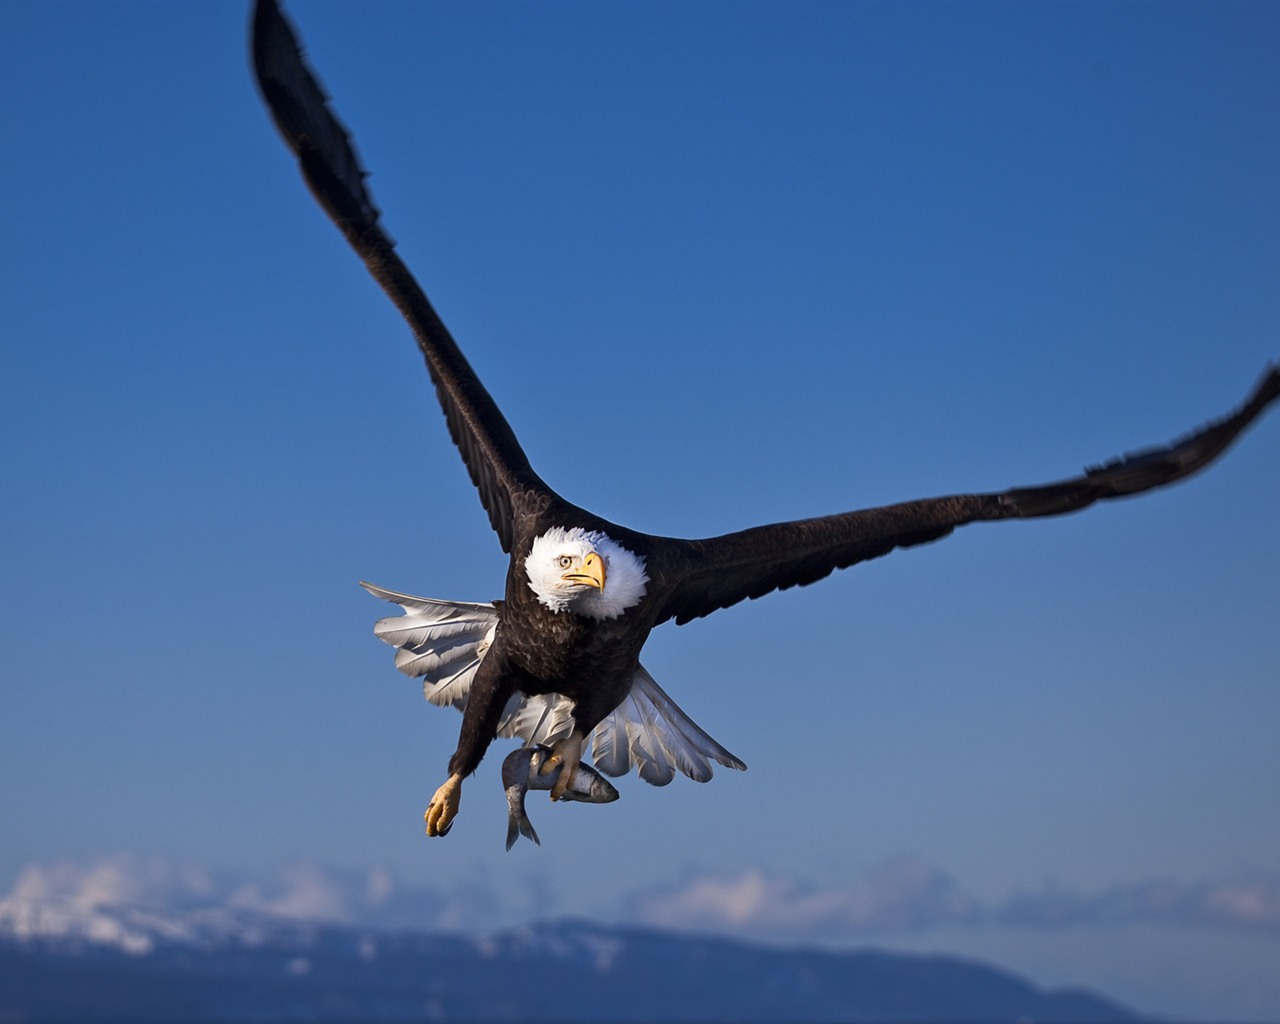 Windows 7 Wallpapers: aves rapaces #2 - 1280x1024